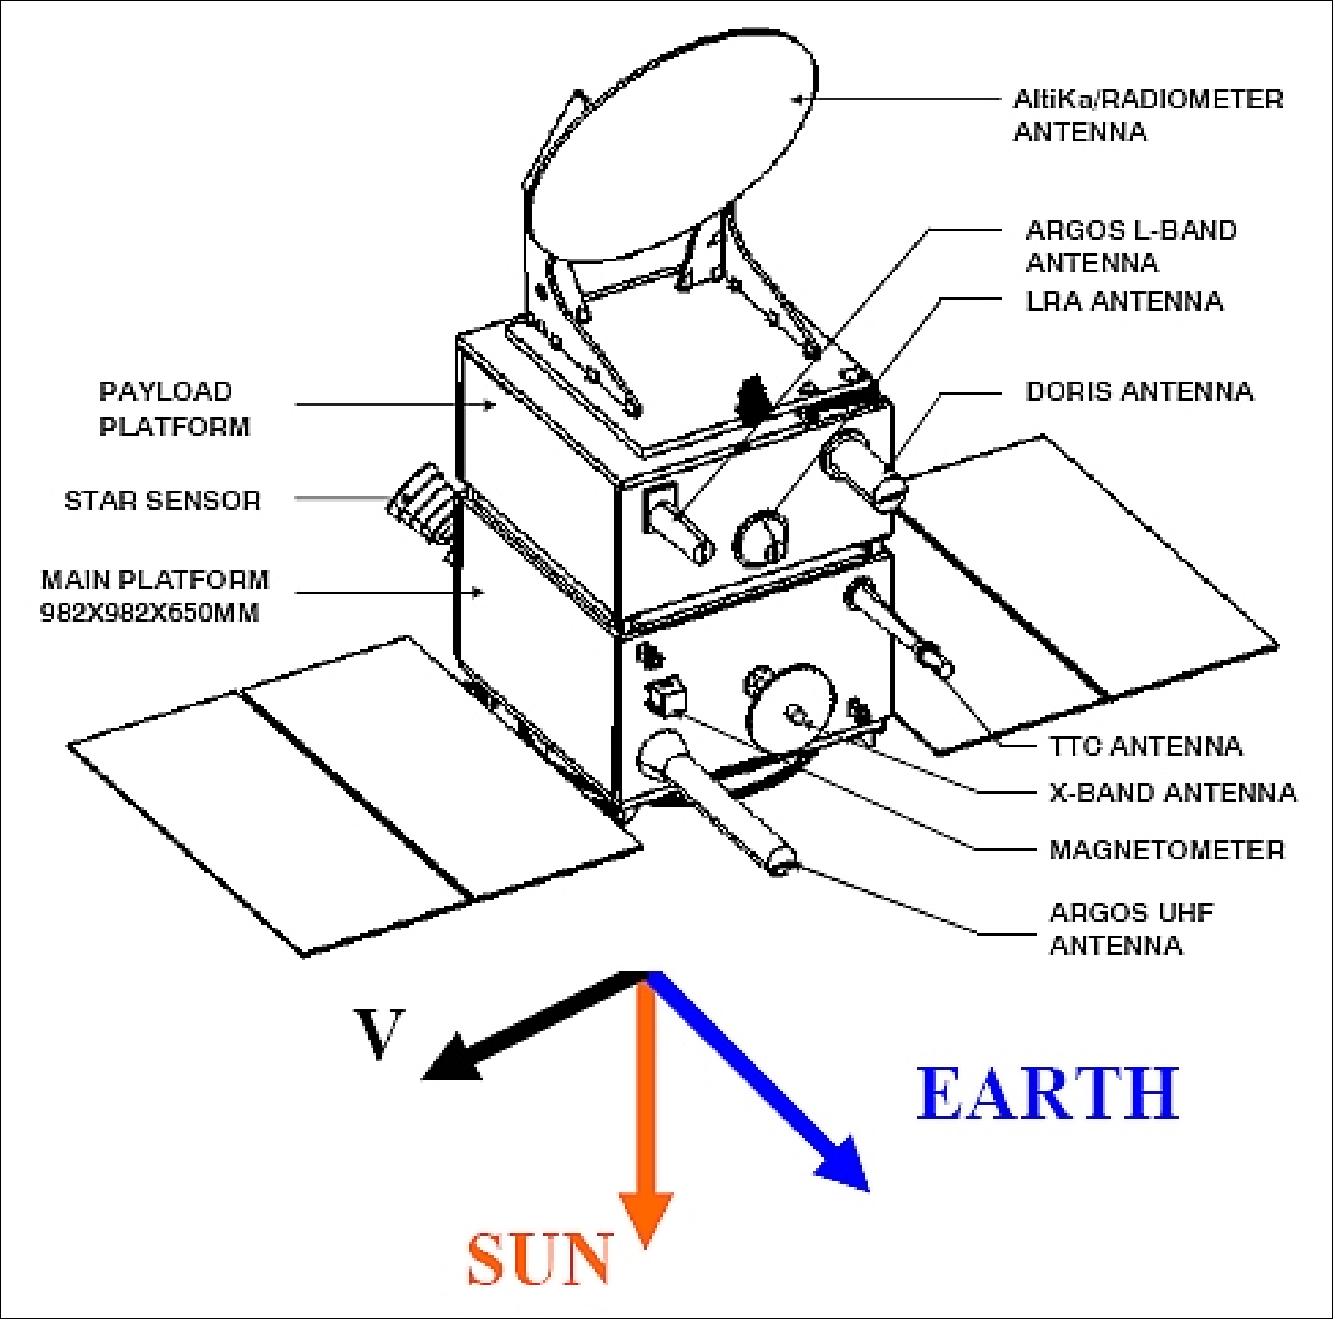 Figure 2: Overview of the SARAL spacecraft configuration (image credit: ISRO/CNES)